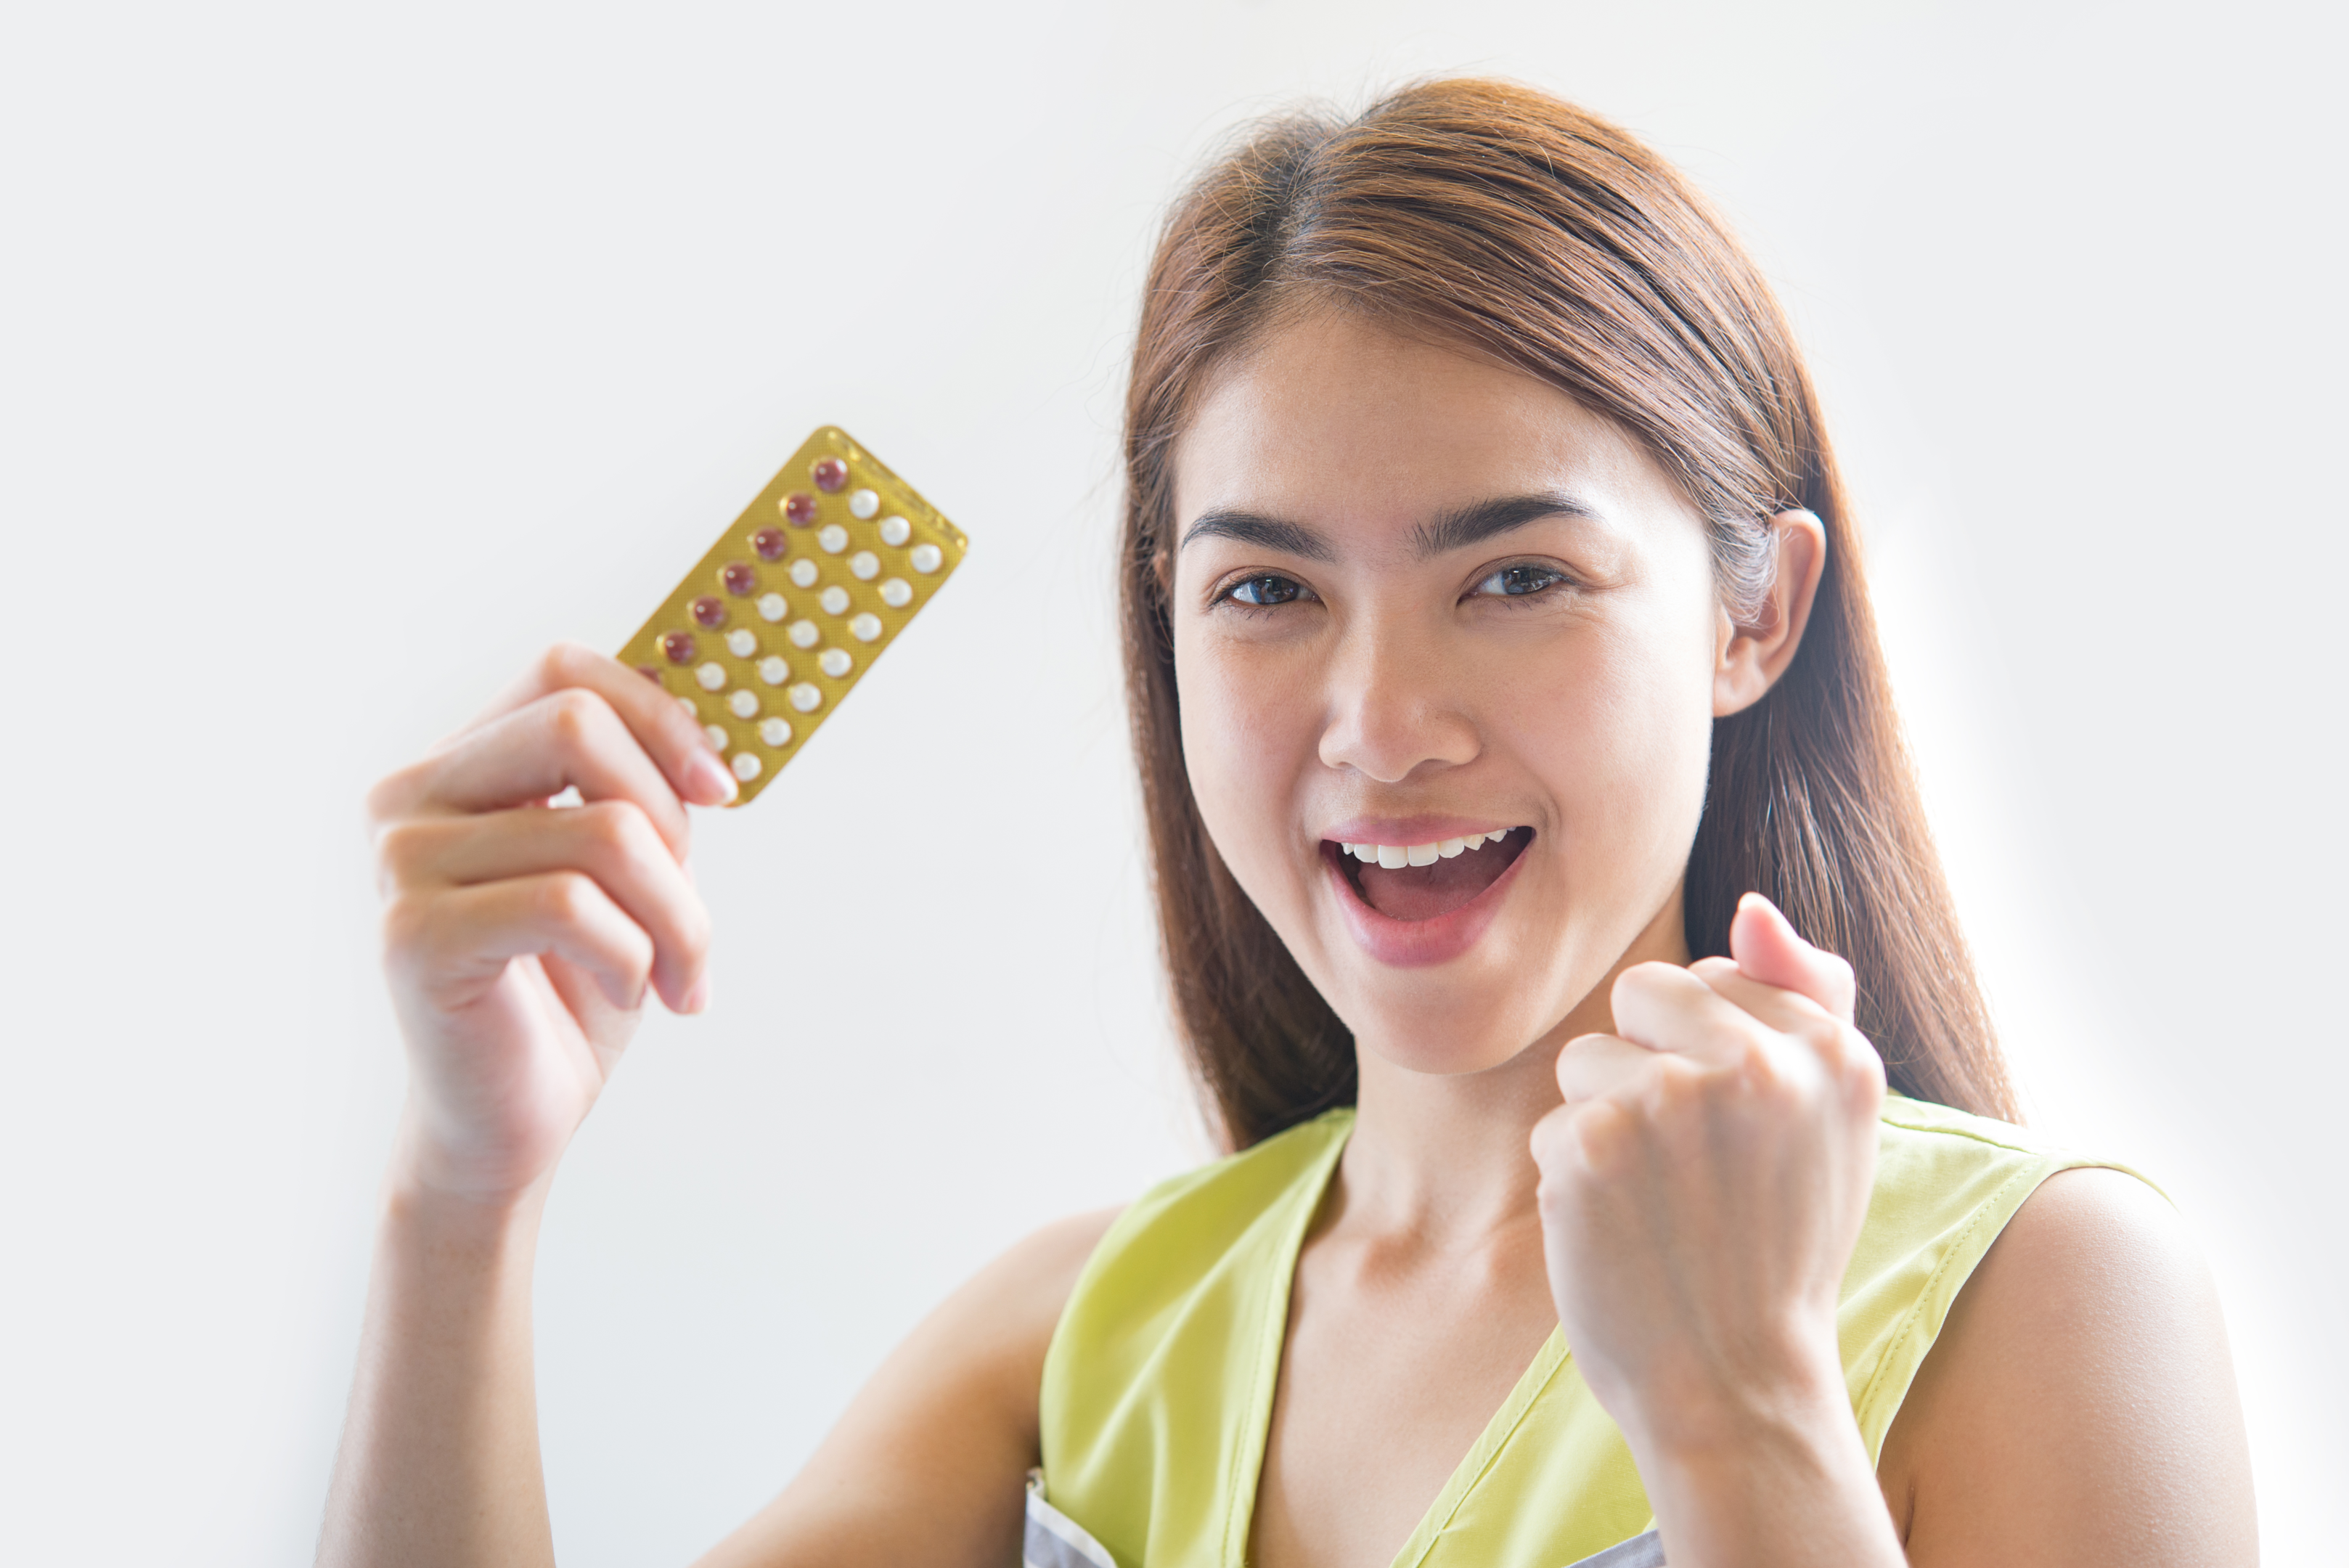 There are two types of contraceptive pill.